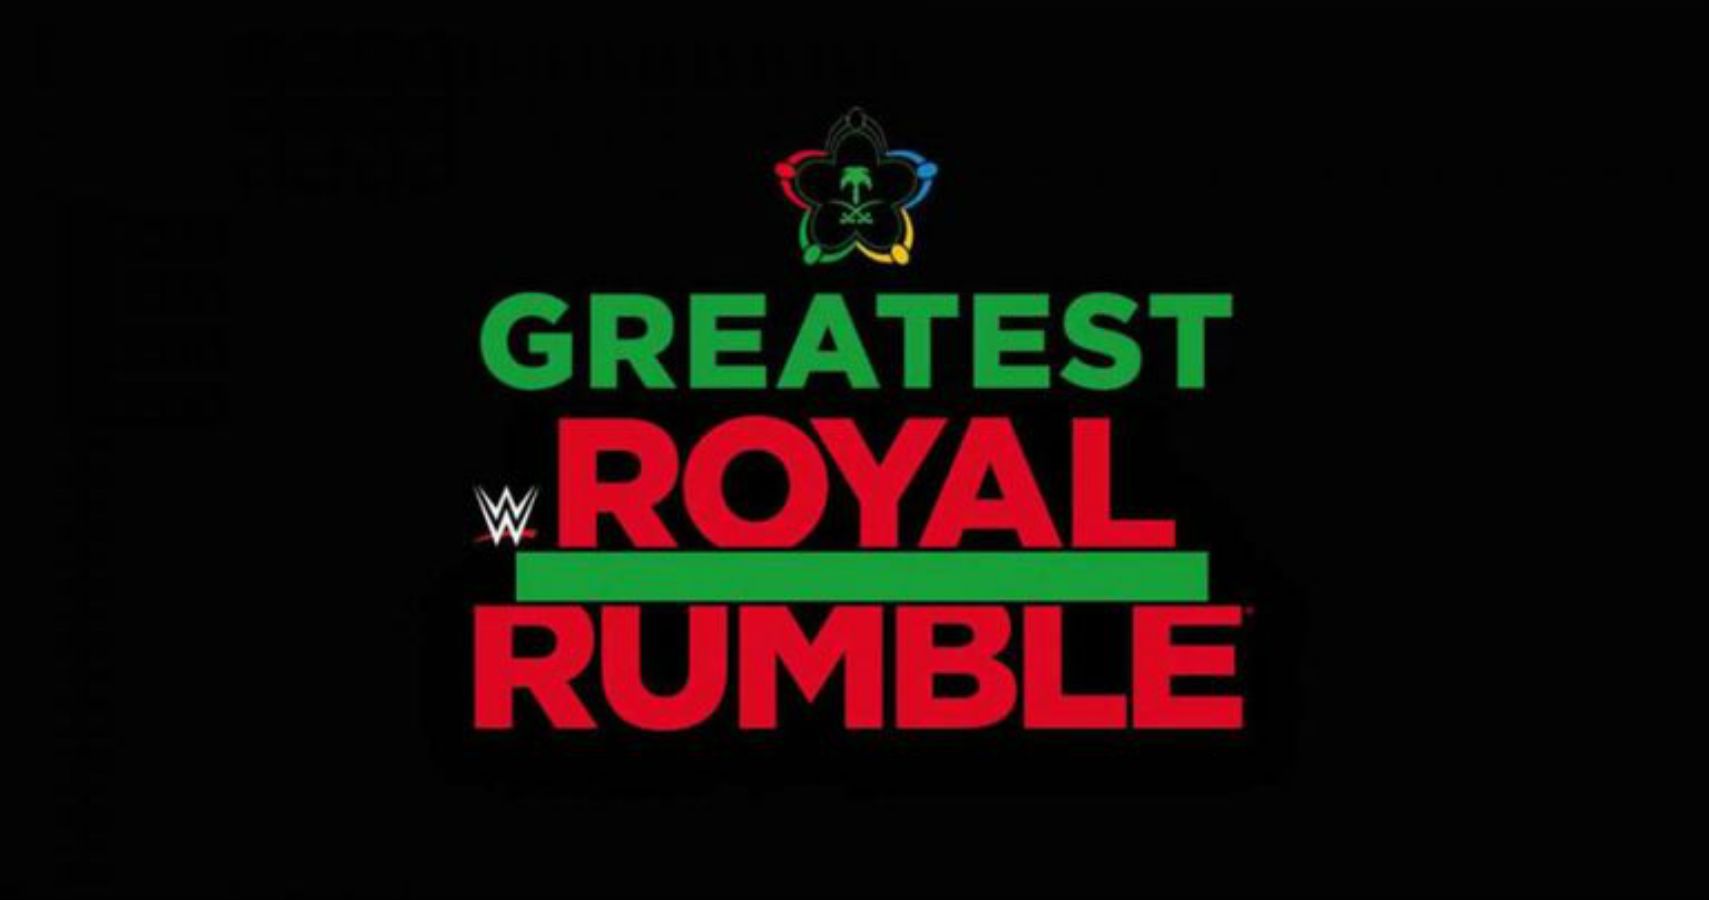 WWE GREATEST ROYAL RUMBLE CHAMPIONSHIP. Now available on CC